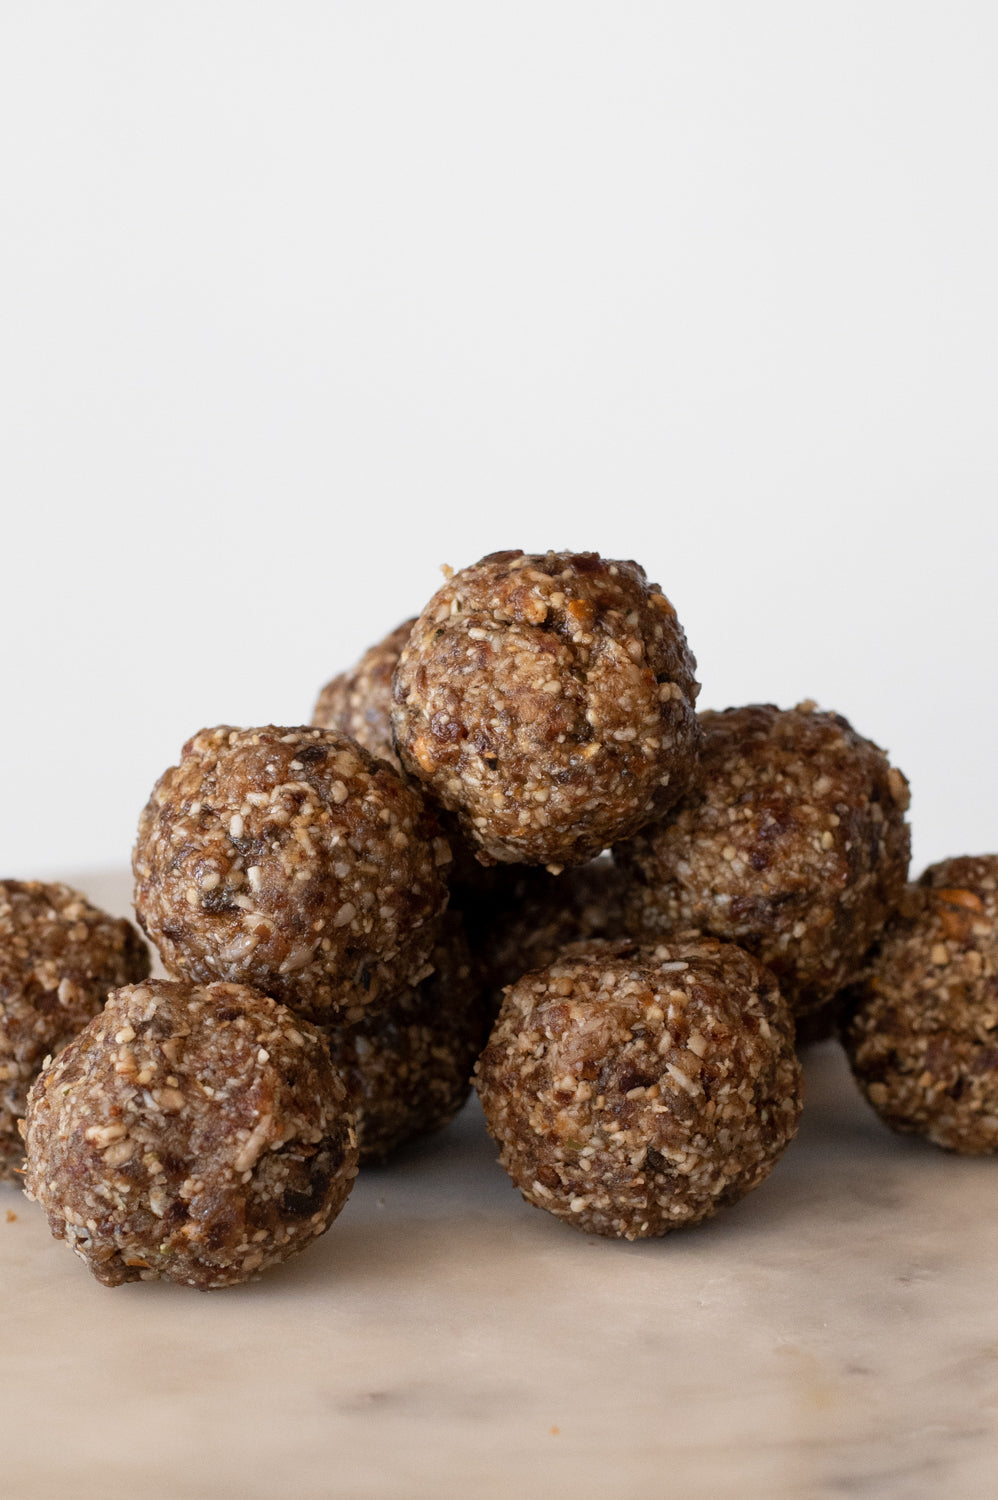 A pile of date balls on a plate